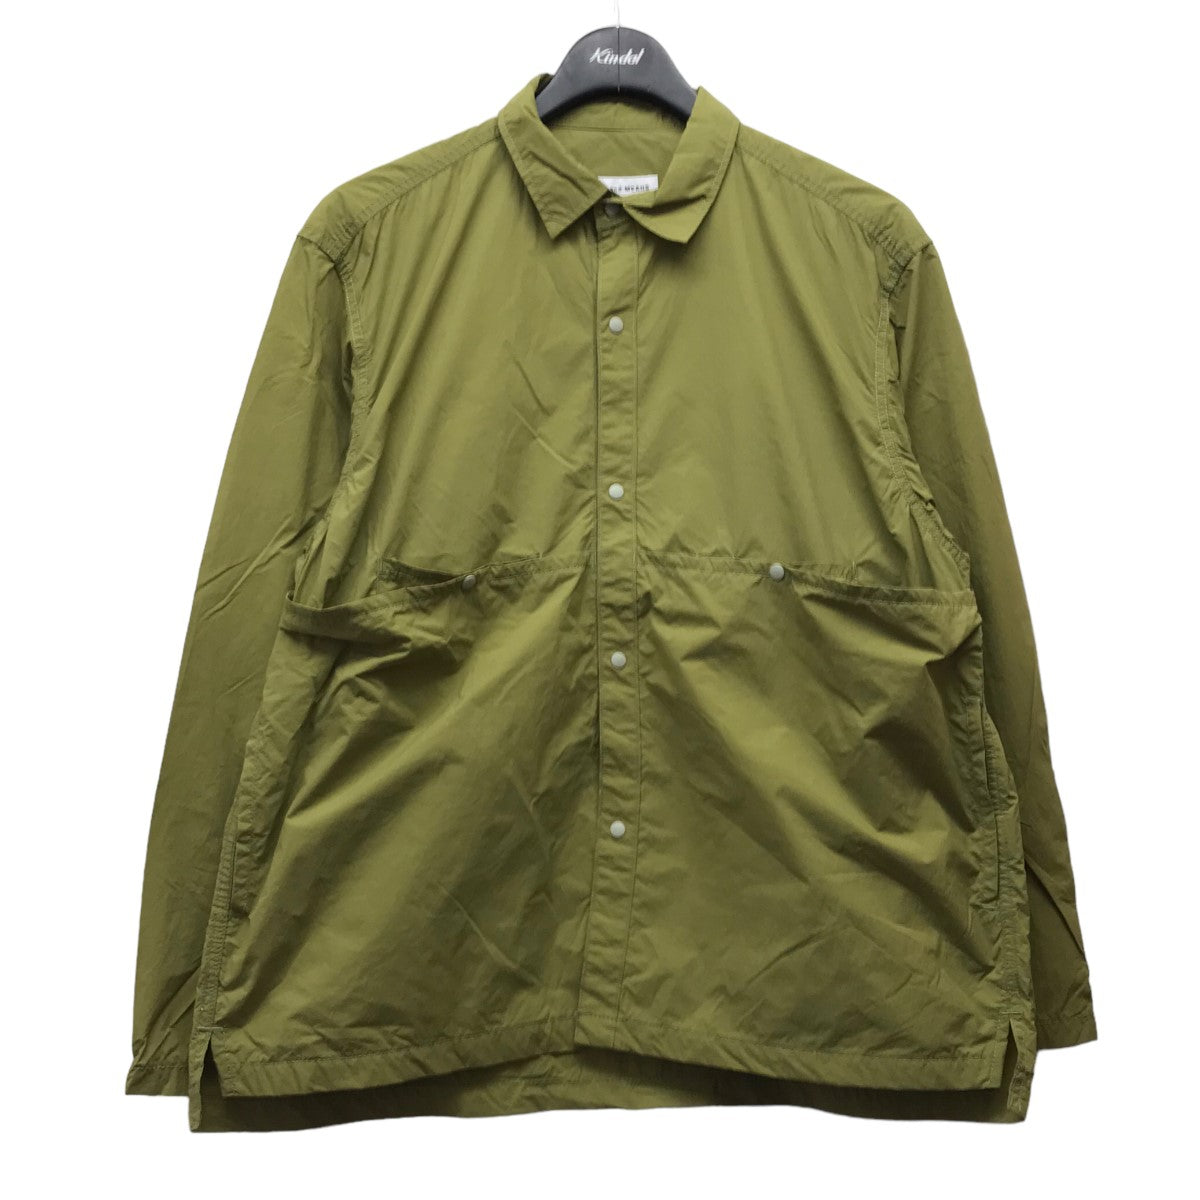 ENDS AND MEANS(エンズアンドミーン) 「Light Shirts Jacket」ライトシャツジャケット